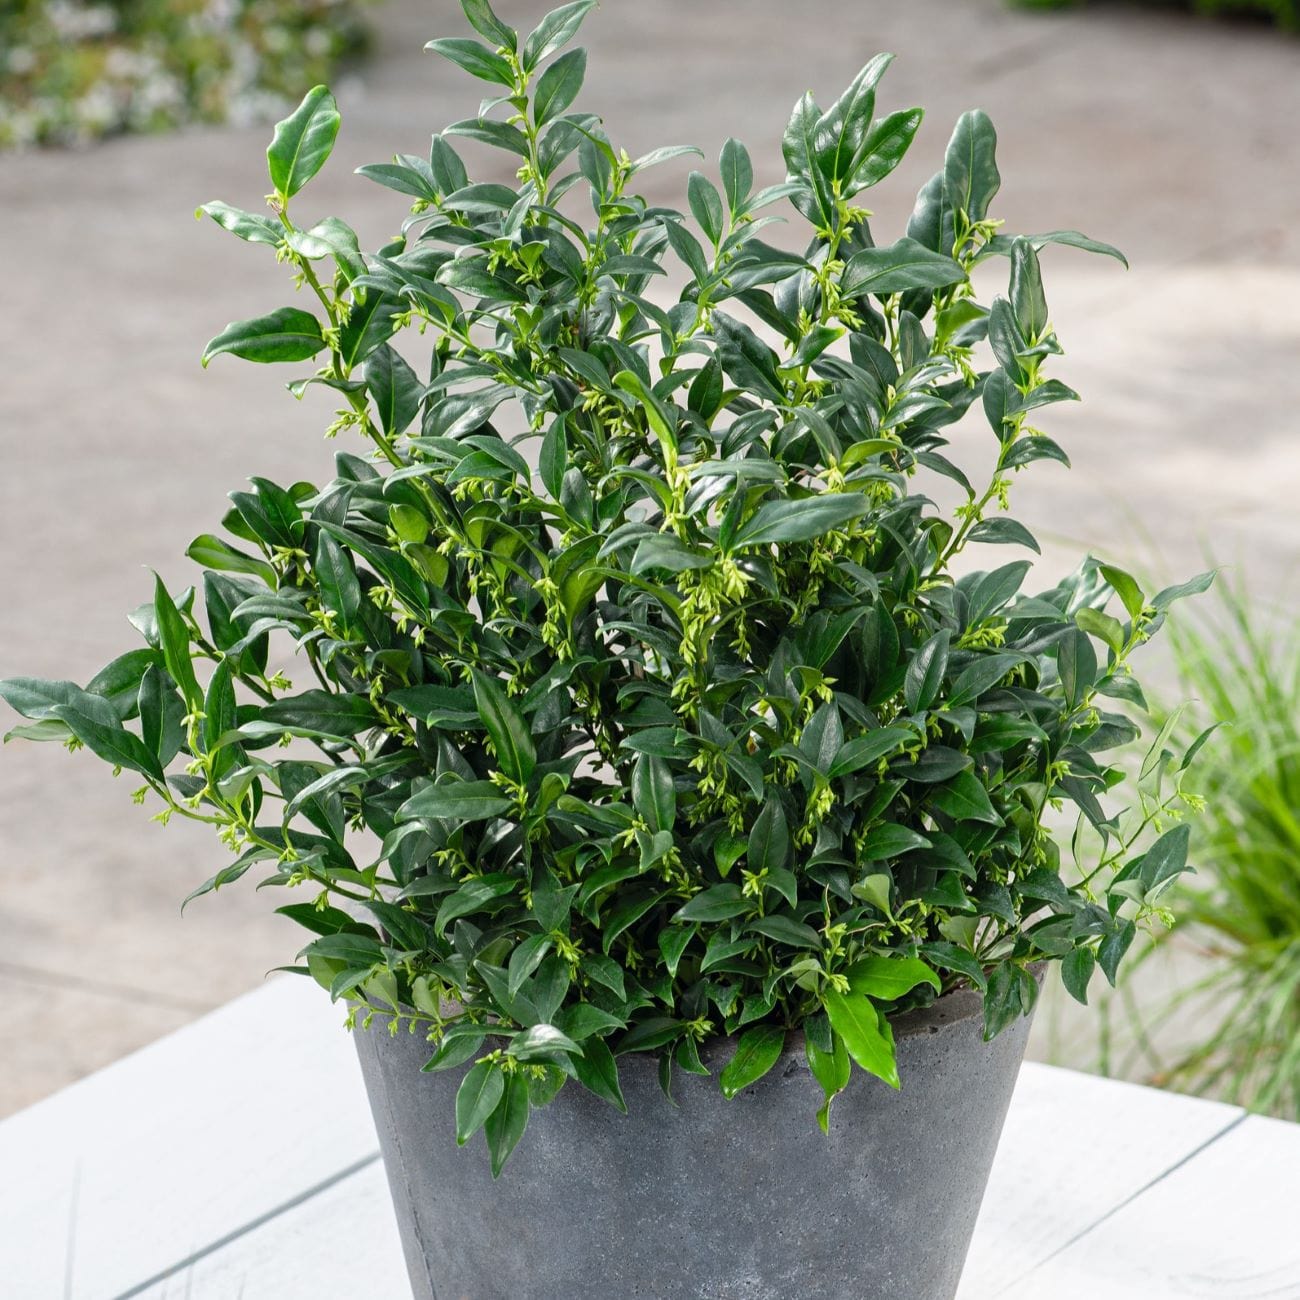 1 x 3 Litre Potted Plant Sarcococca confusa